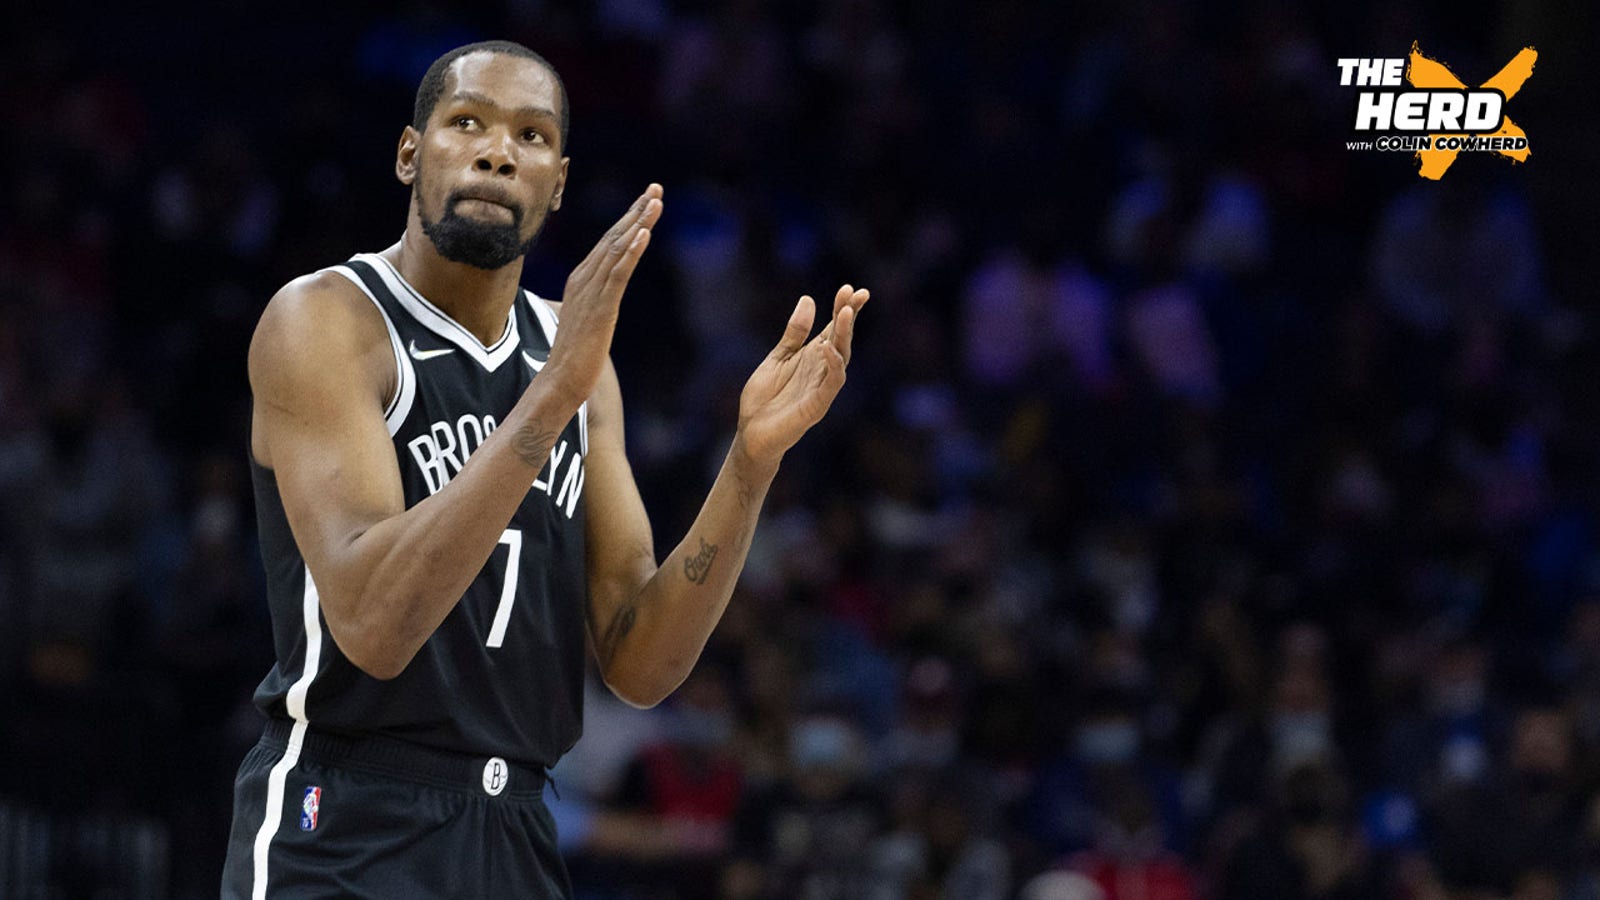 Kevin Durant agrees to move forward with Nets next season | THE HERD